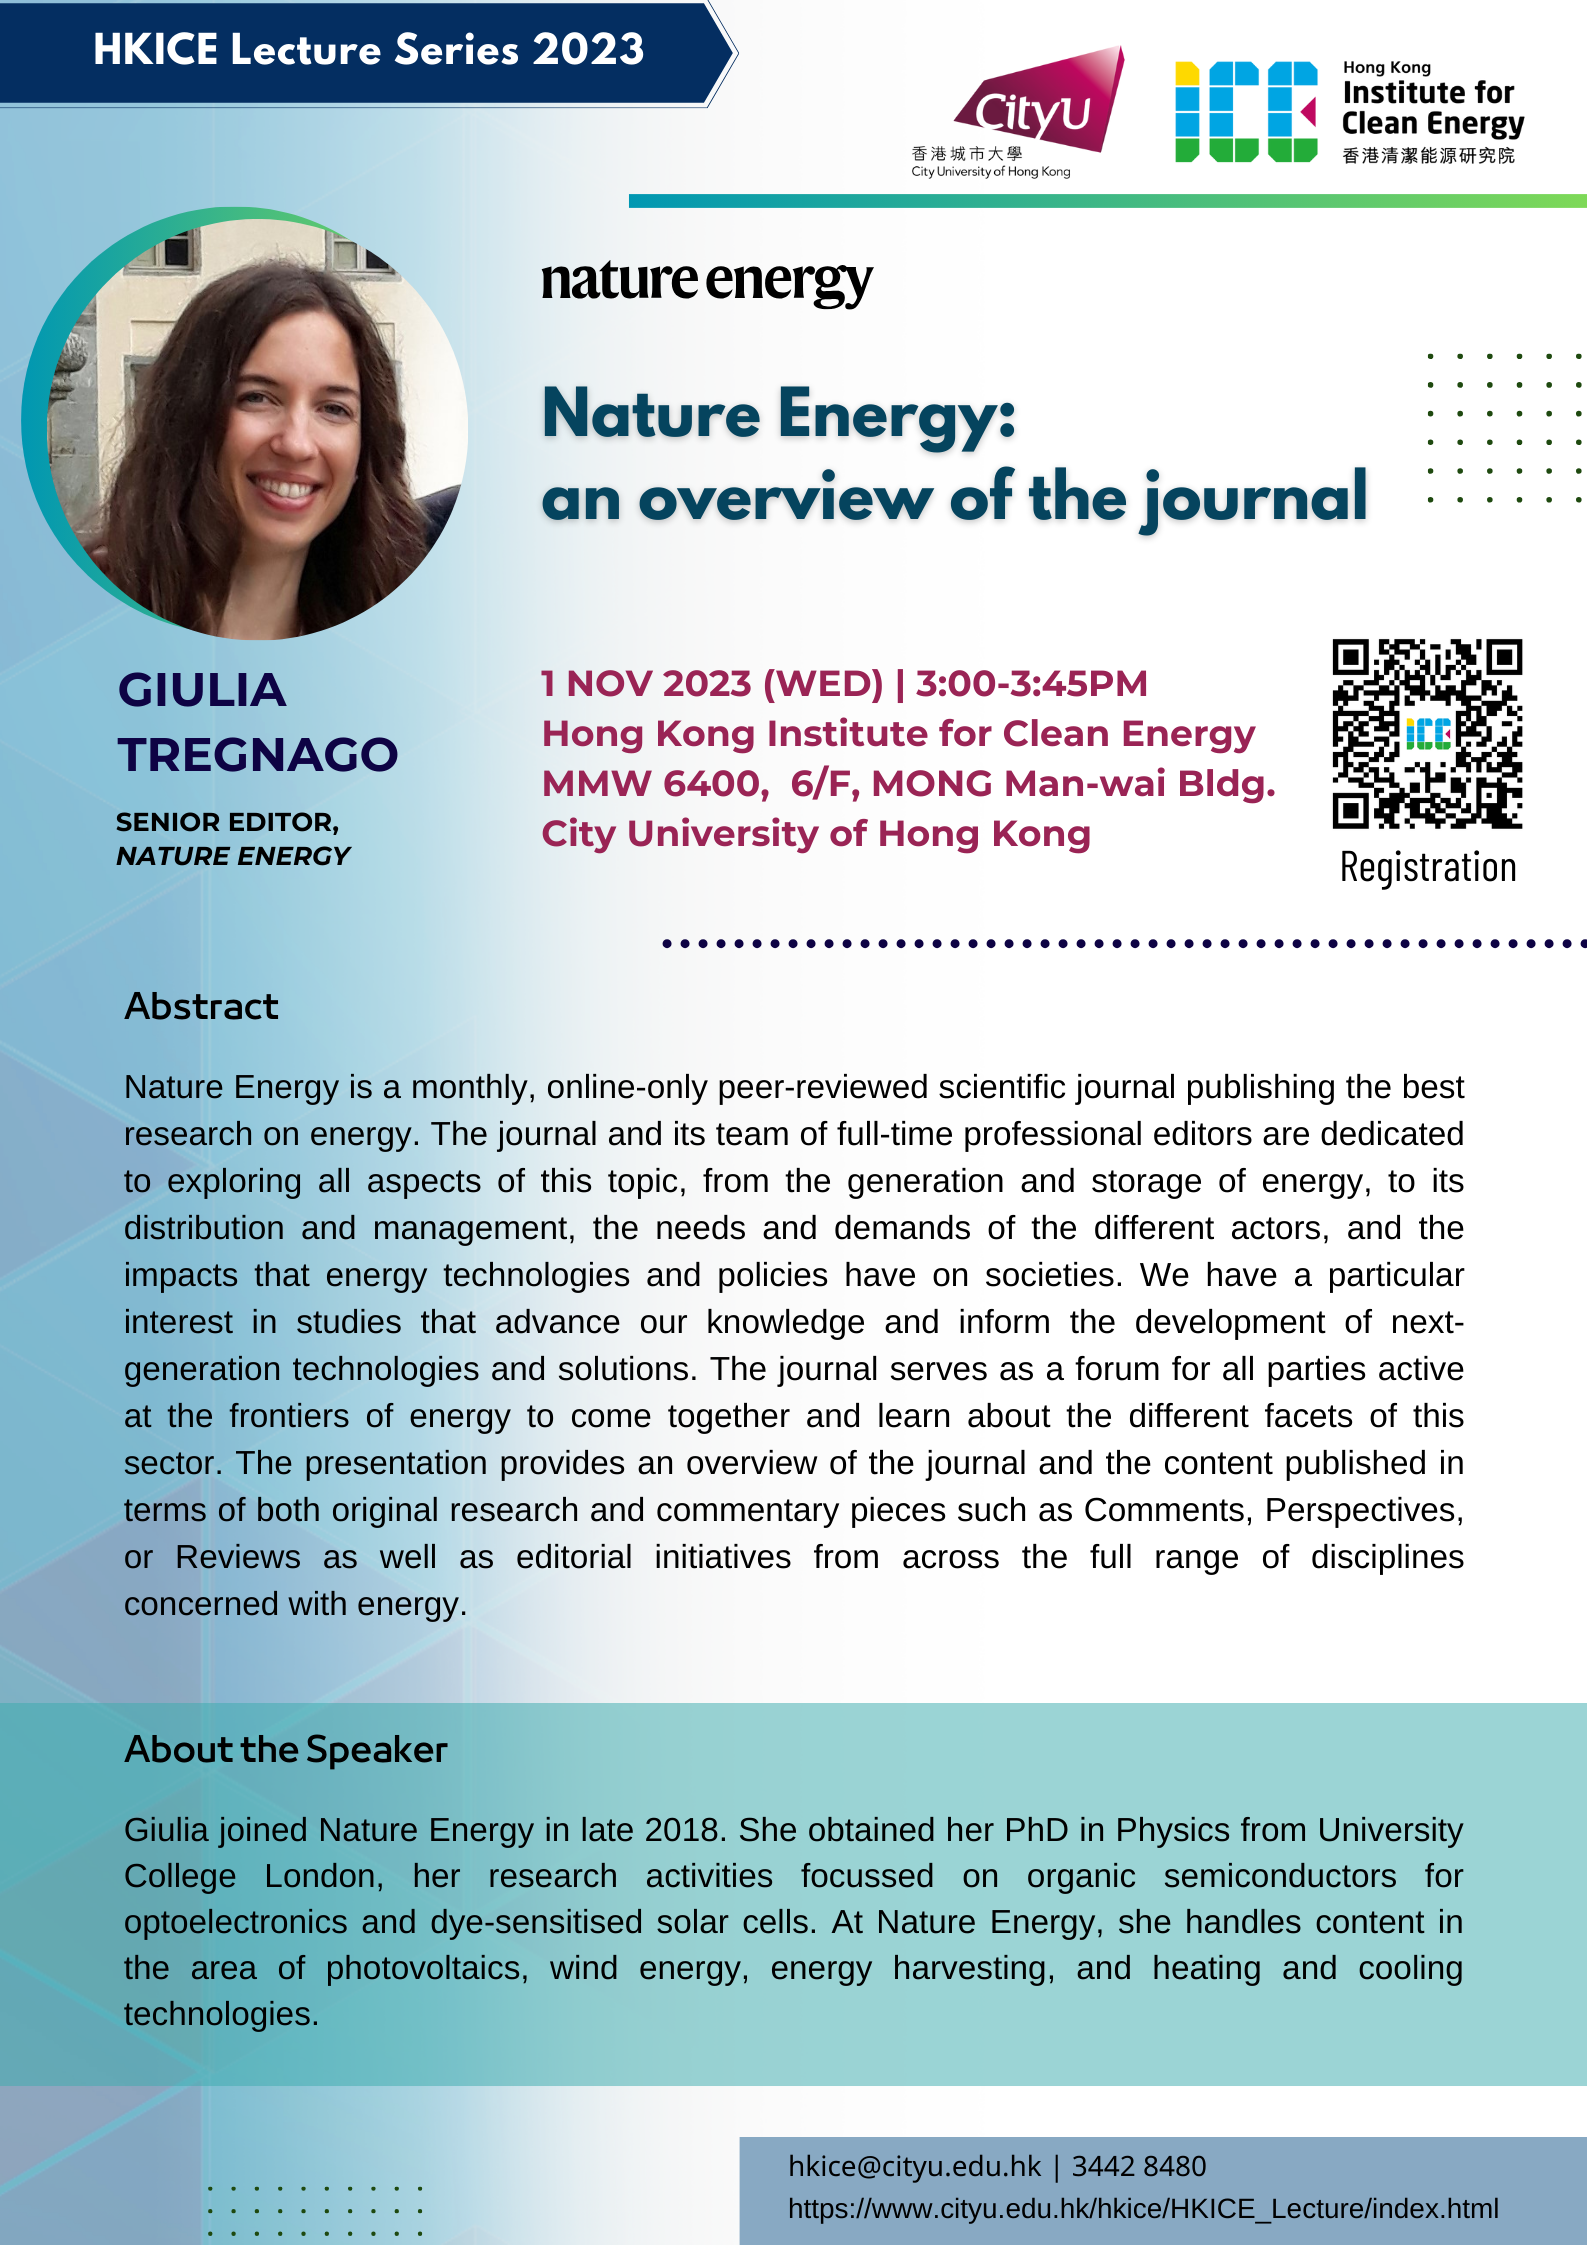 HKICE Lecture Series Featuring Dr. Giulia Tregnago